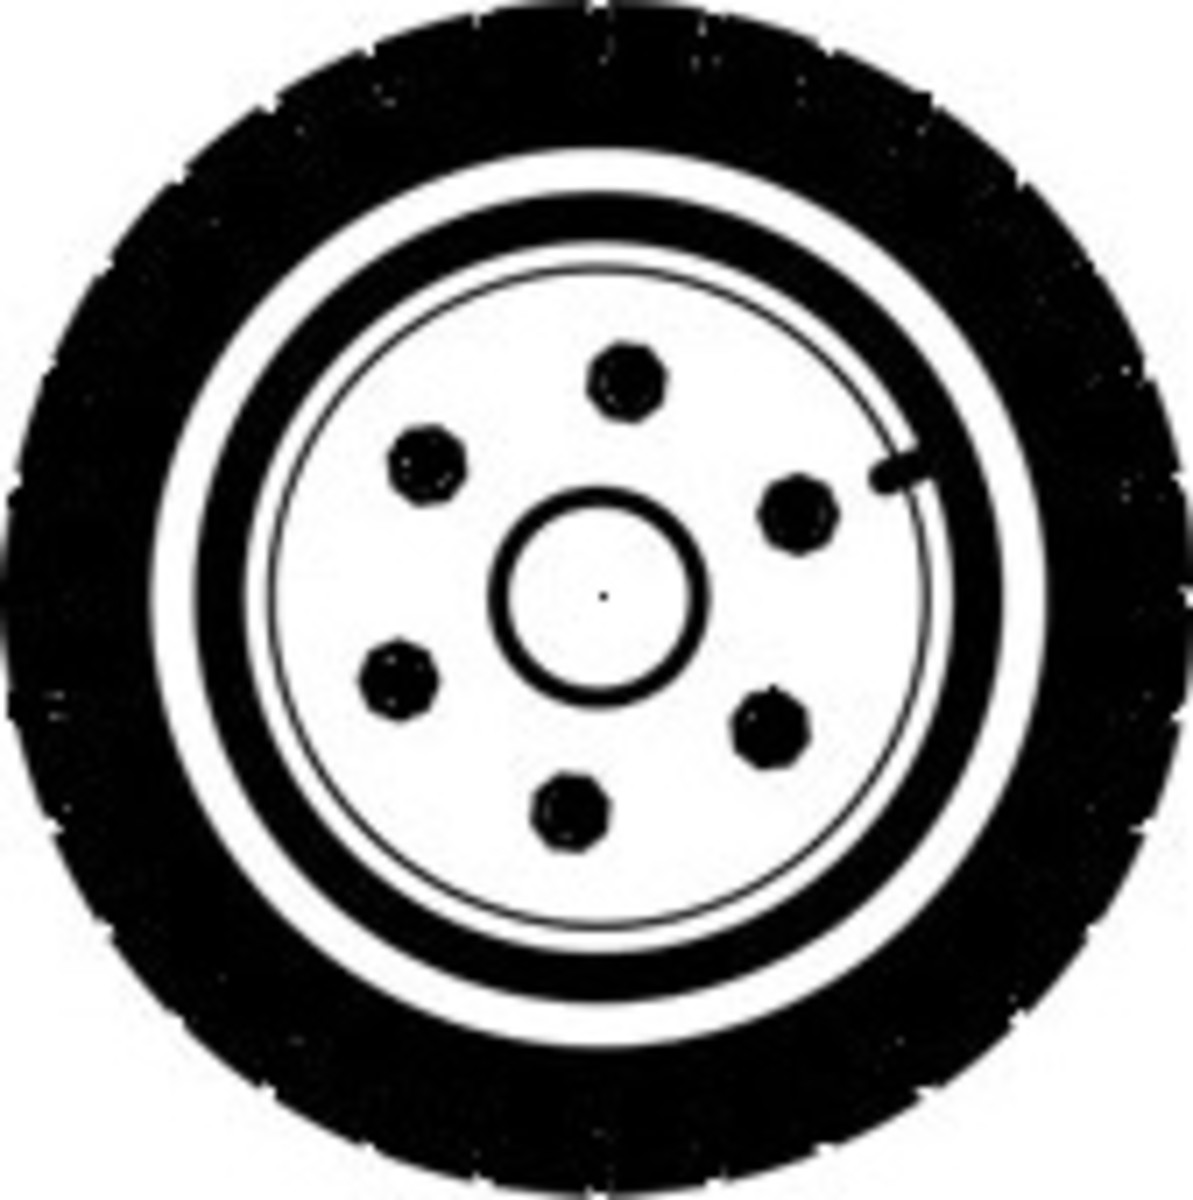 RV and Camper Tire Information and Specifications